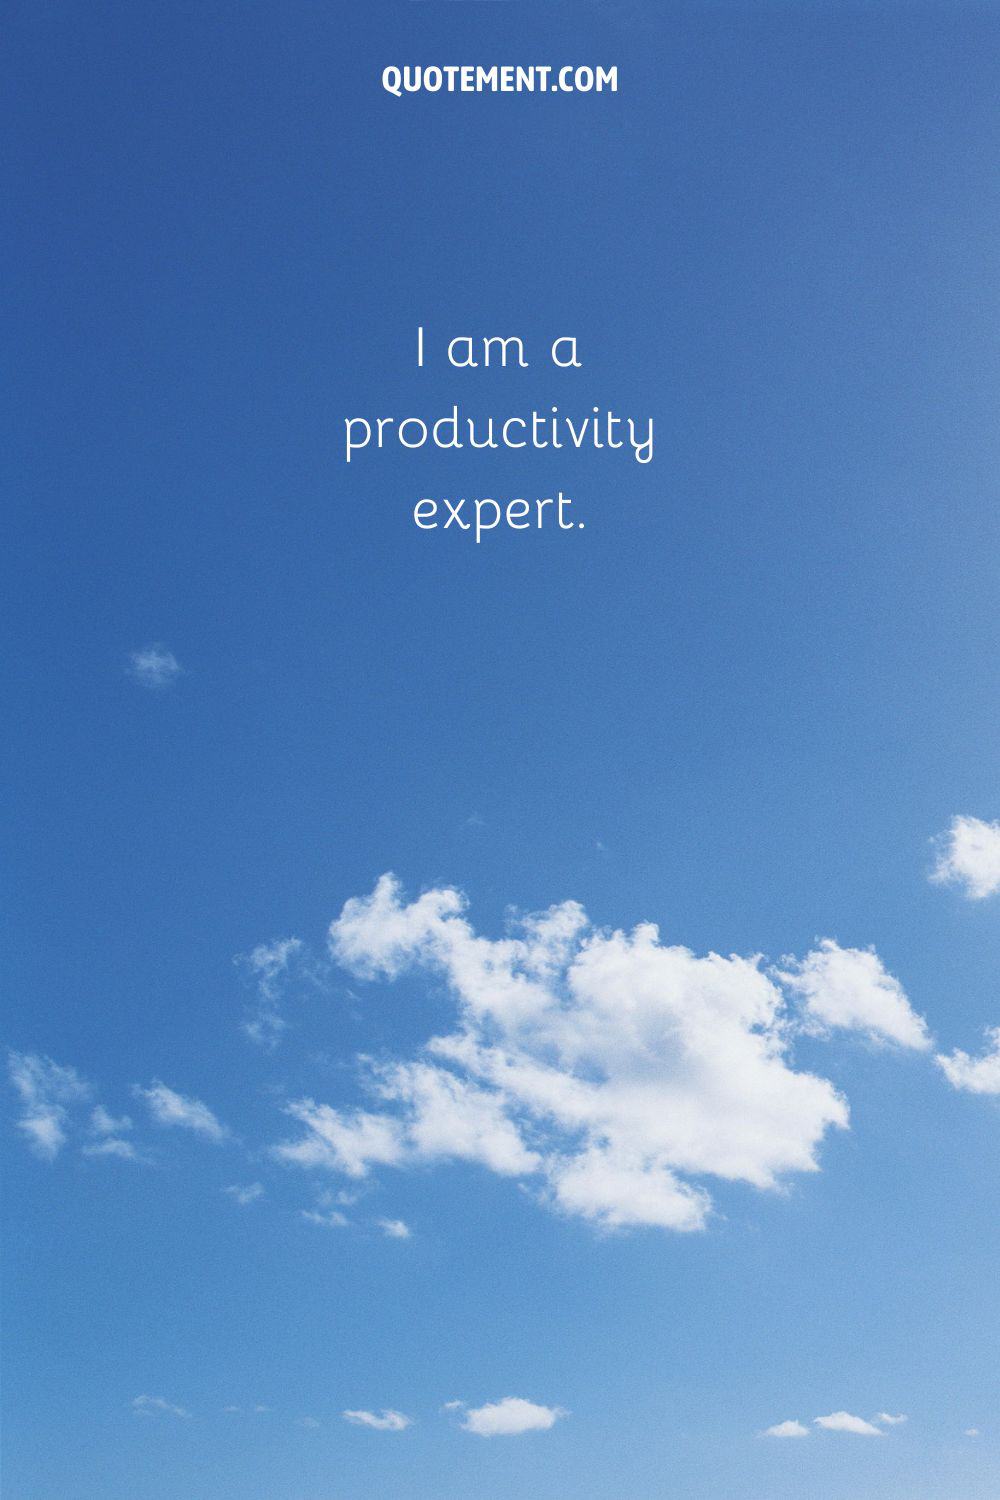 image of the sky representing good affirmation for productivity